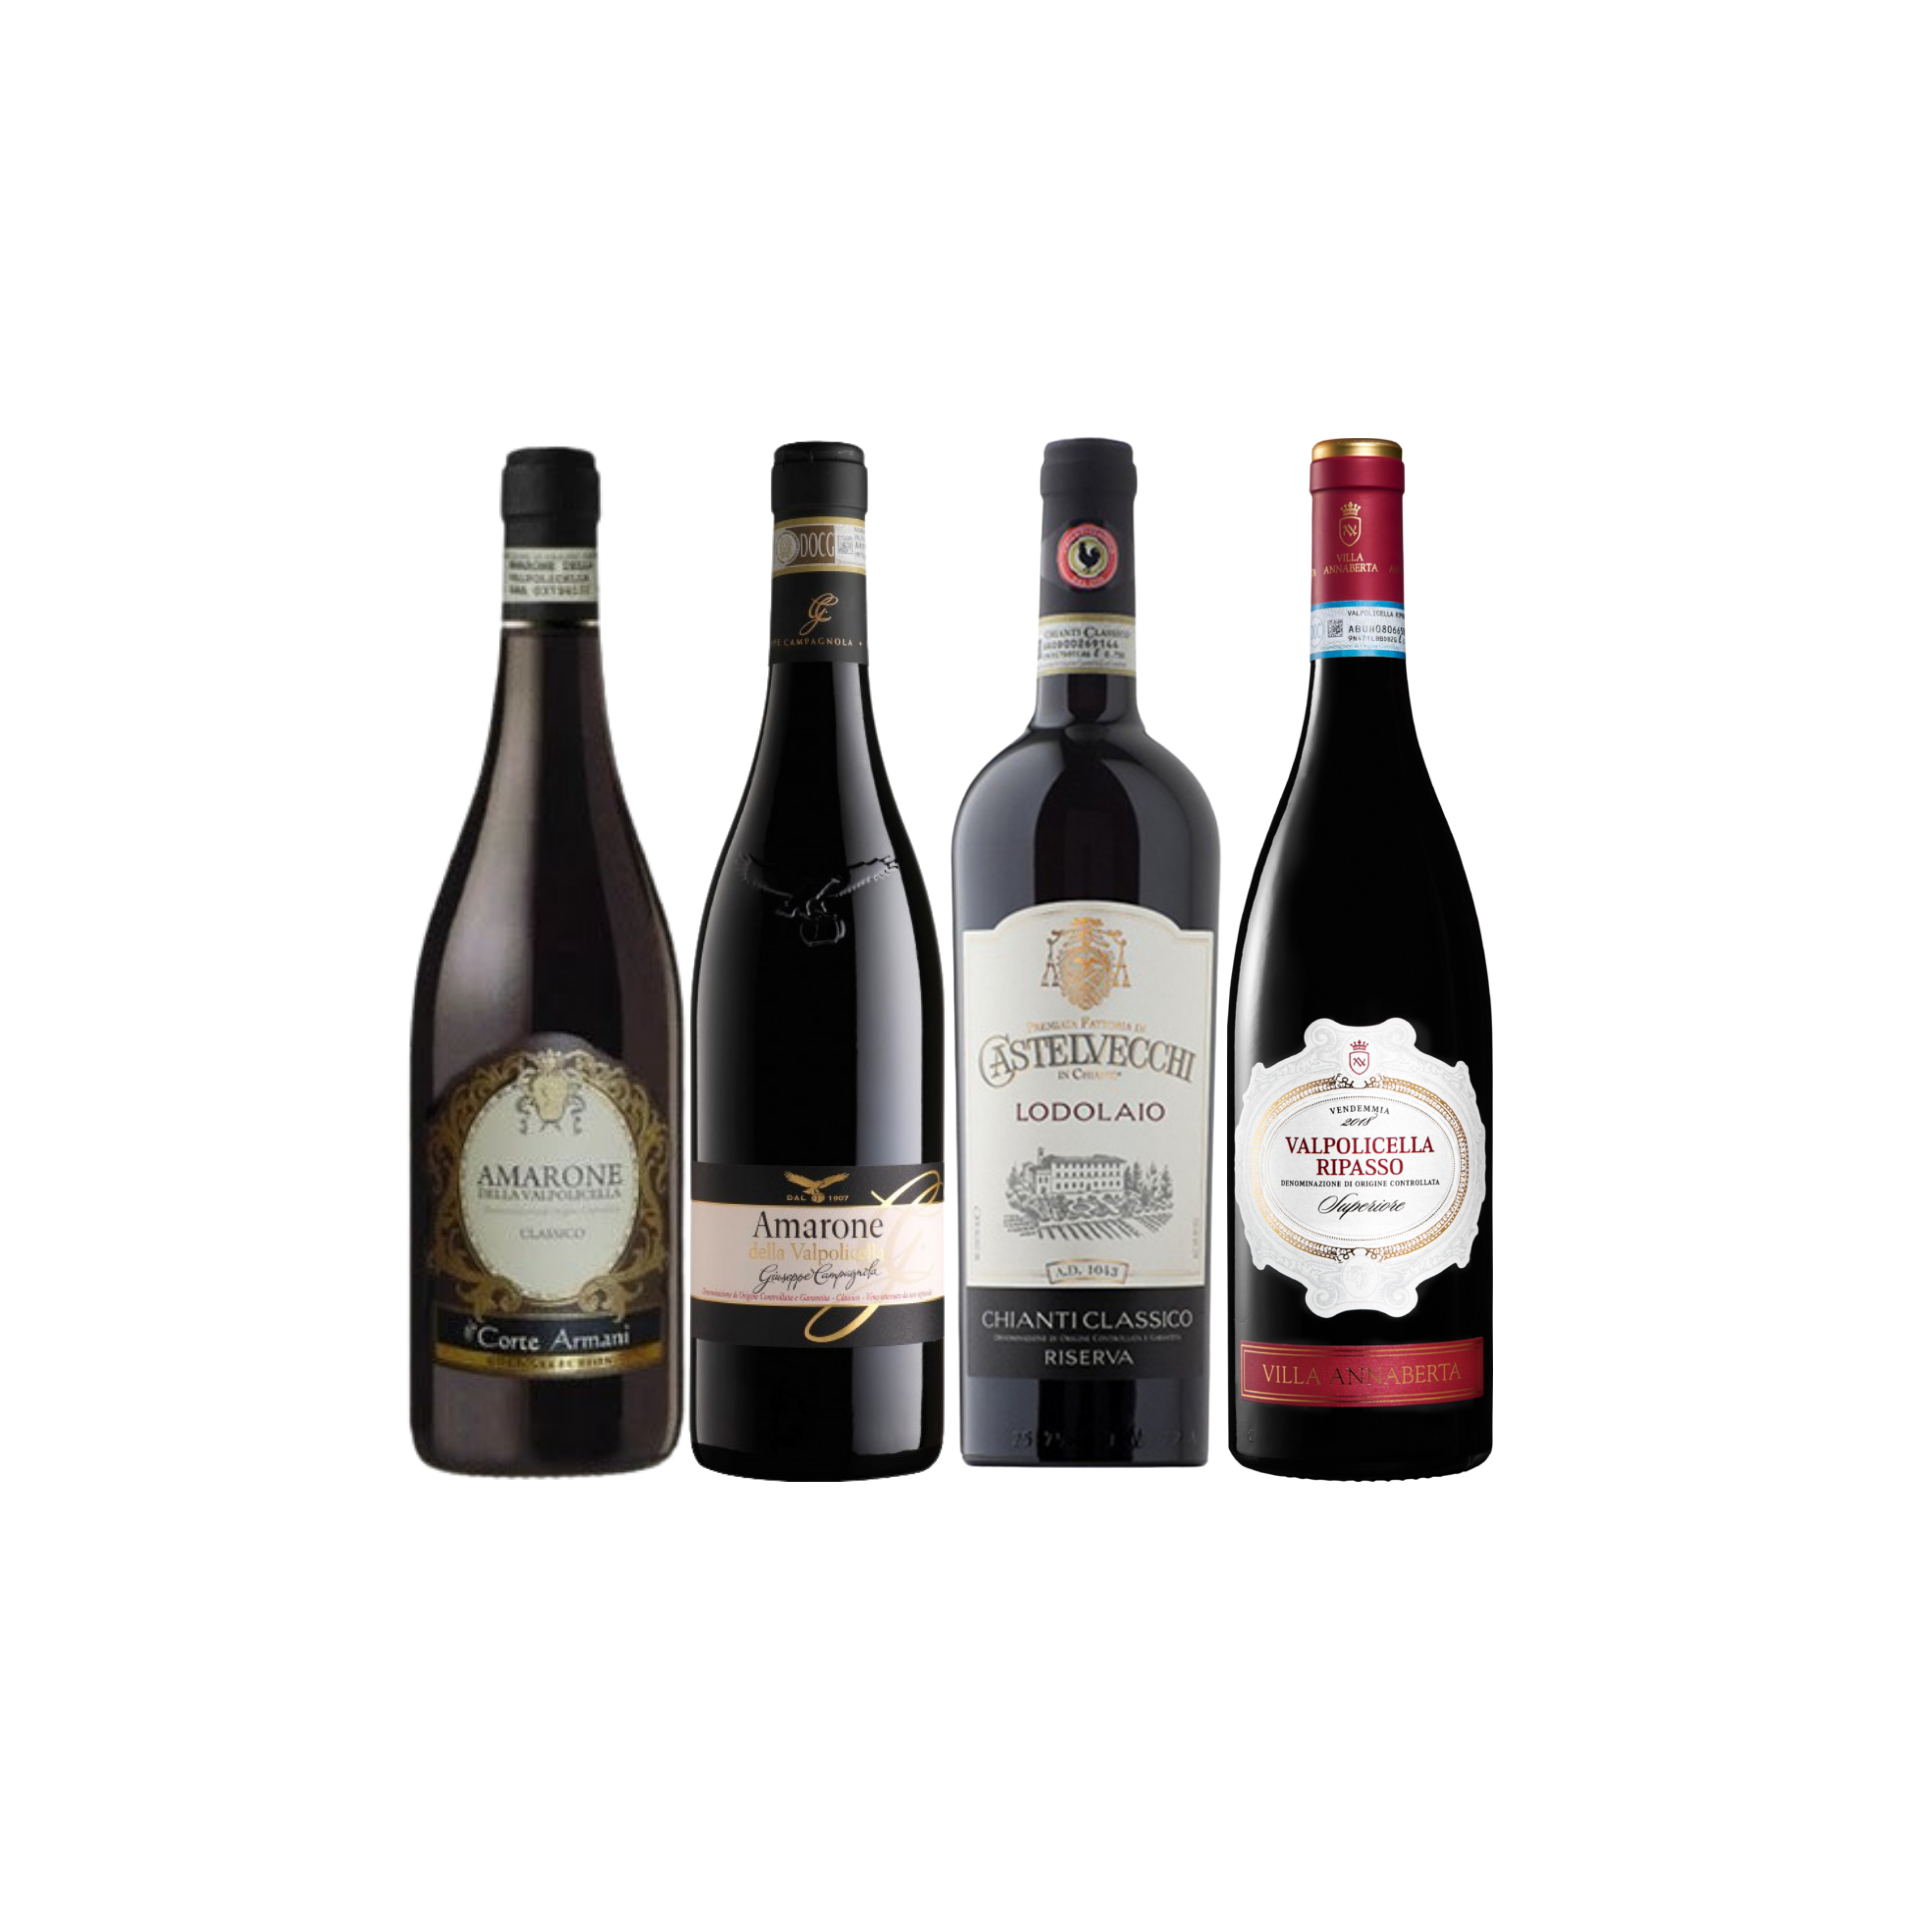 【Bundle A】 Enjoy 2 Bottles of Amarone Plus Chianti Riserva At Only $234 With A Free Set of 6 Schott Zwiesel Wine Glass worth $90 And Top-Up $48 for A Bottle of Ripasso Worth $60